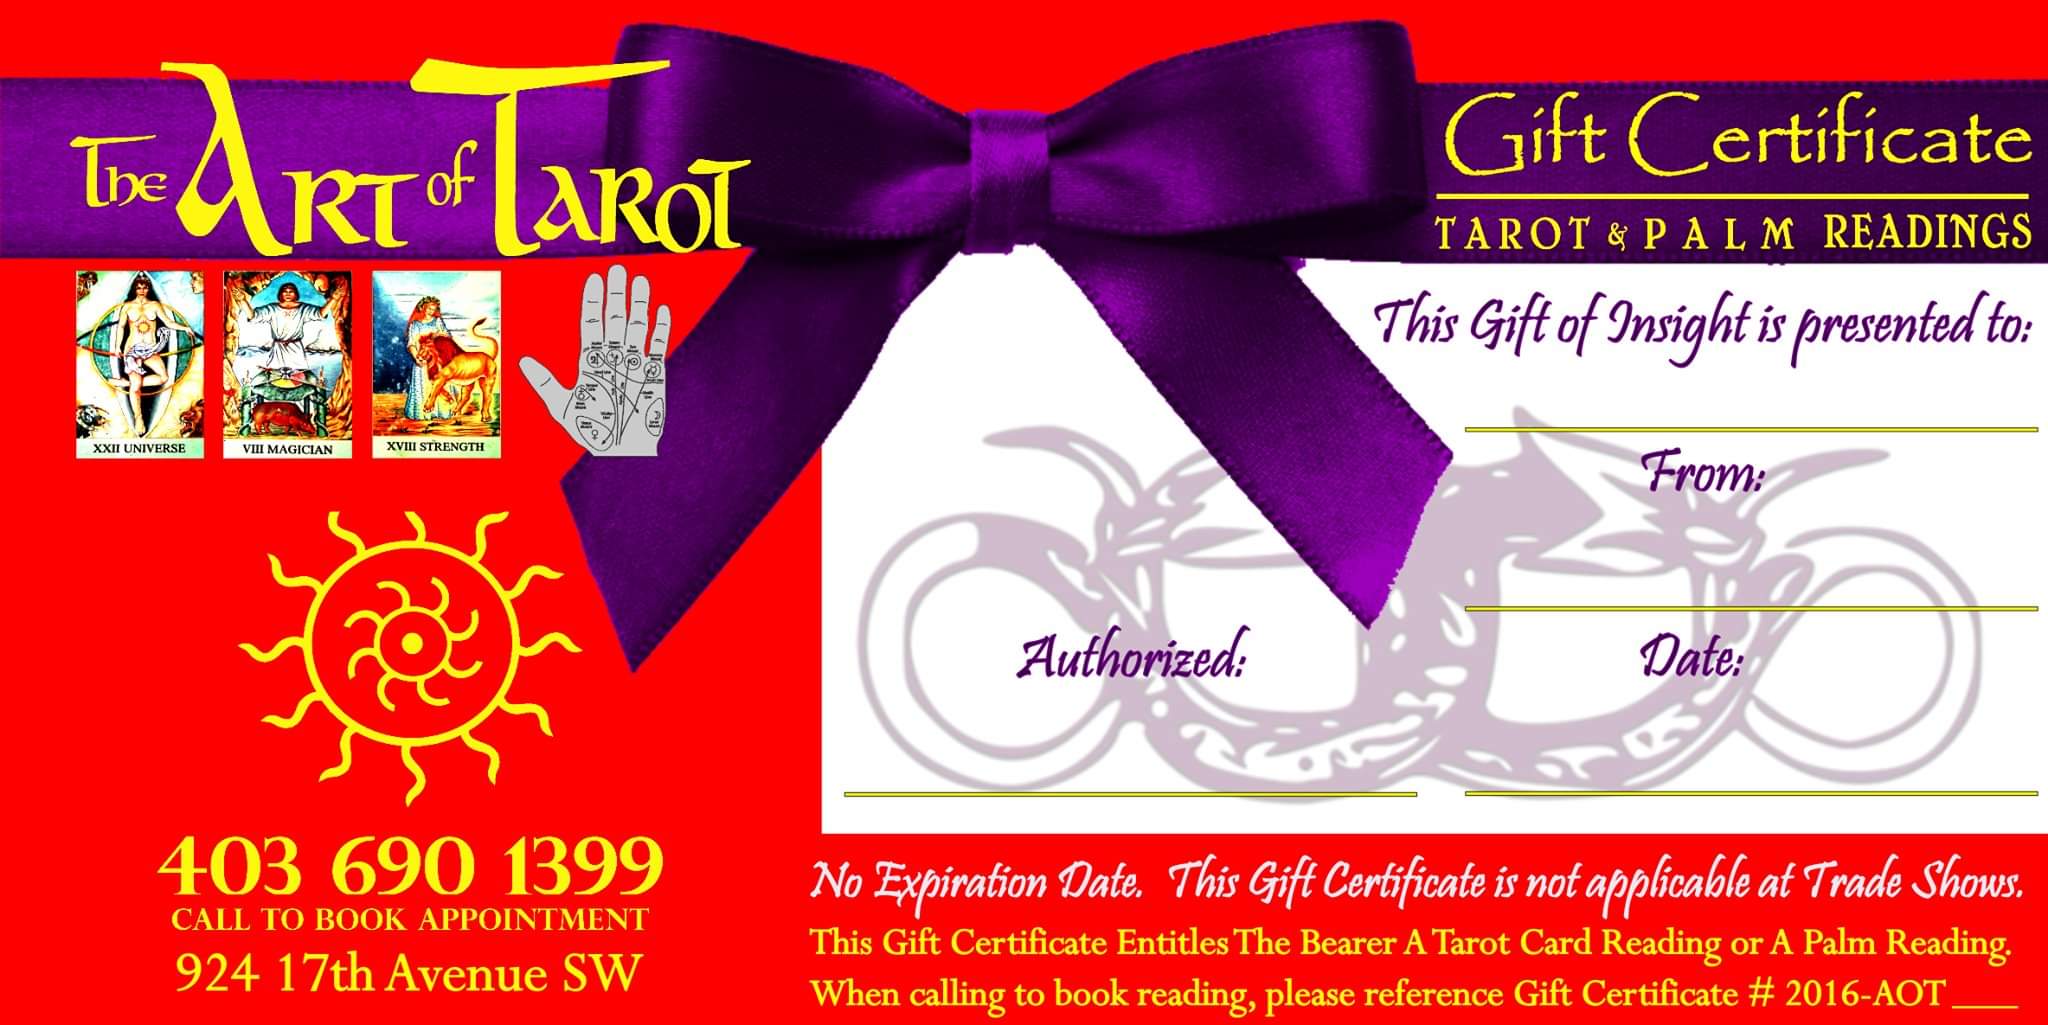 Art of Tarot Gift Certificates Blank Template - Imgflip Intended For This Entitles The Bearer To Template Certificate